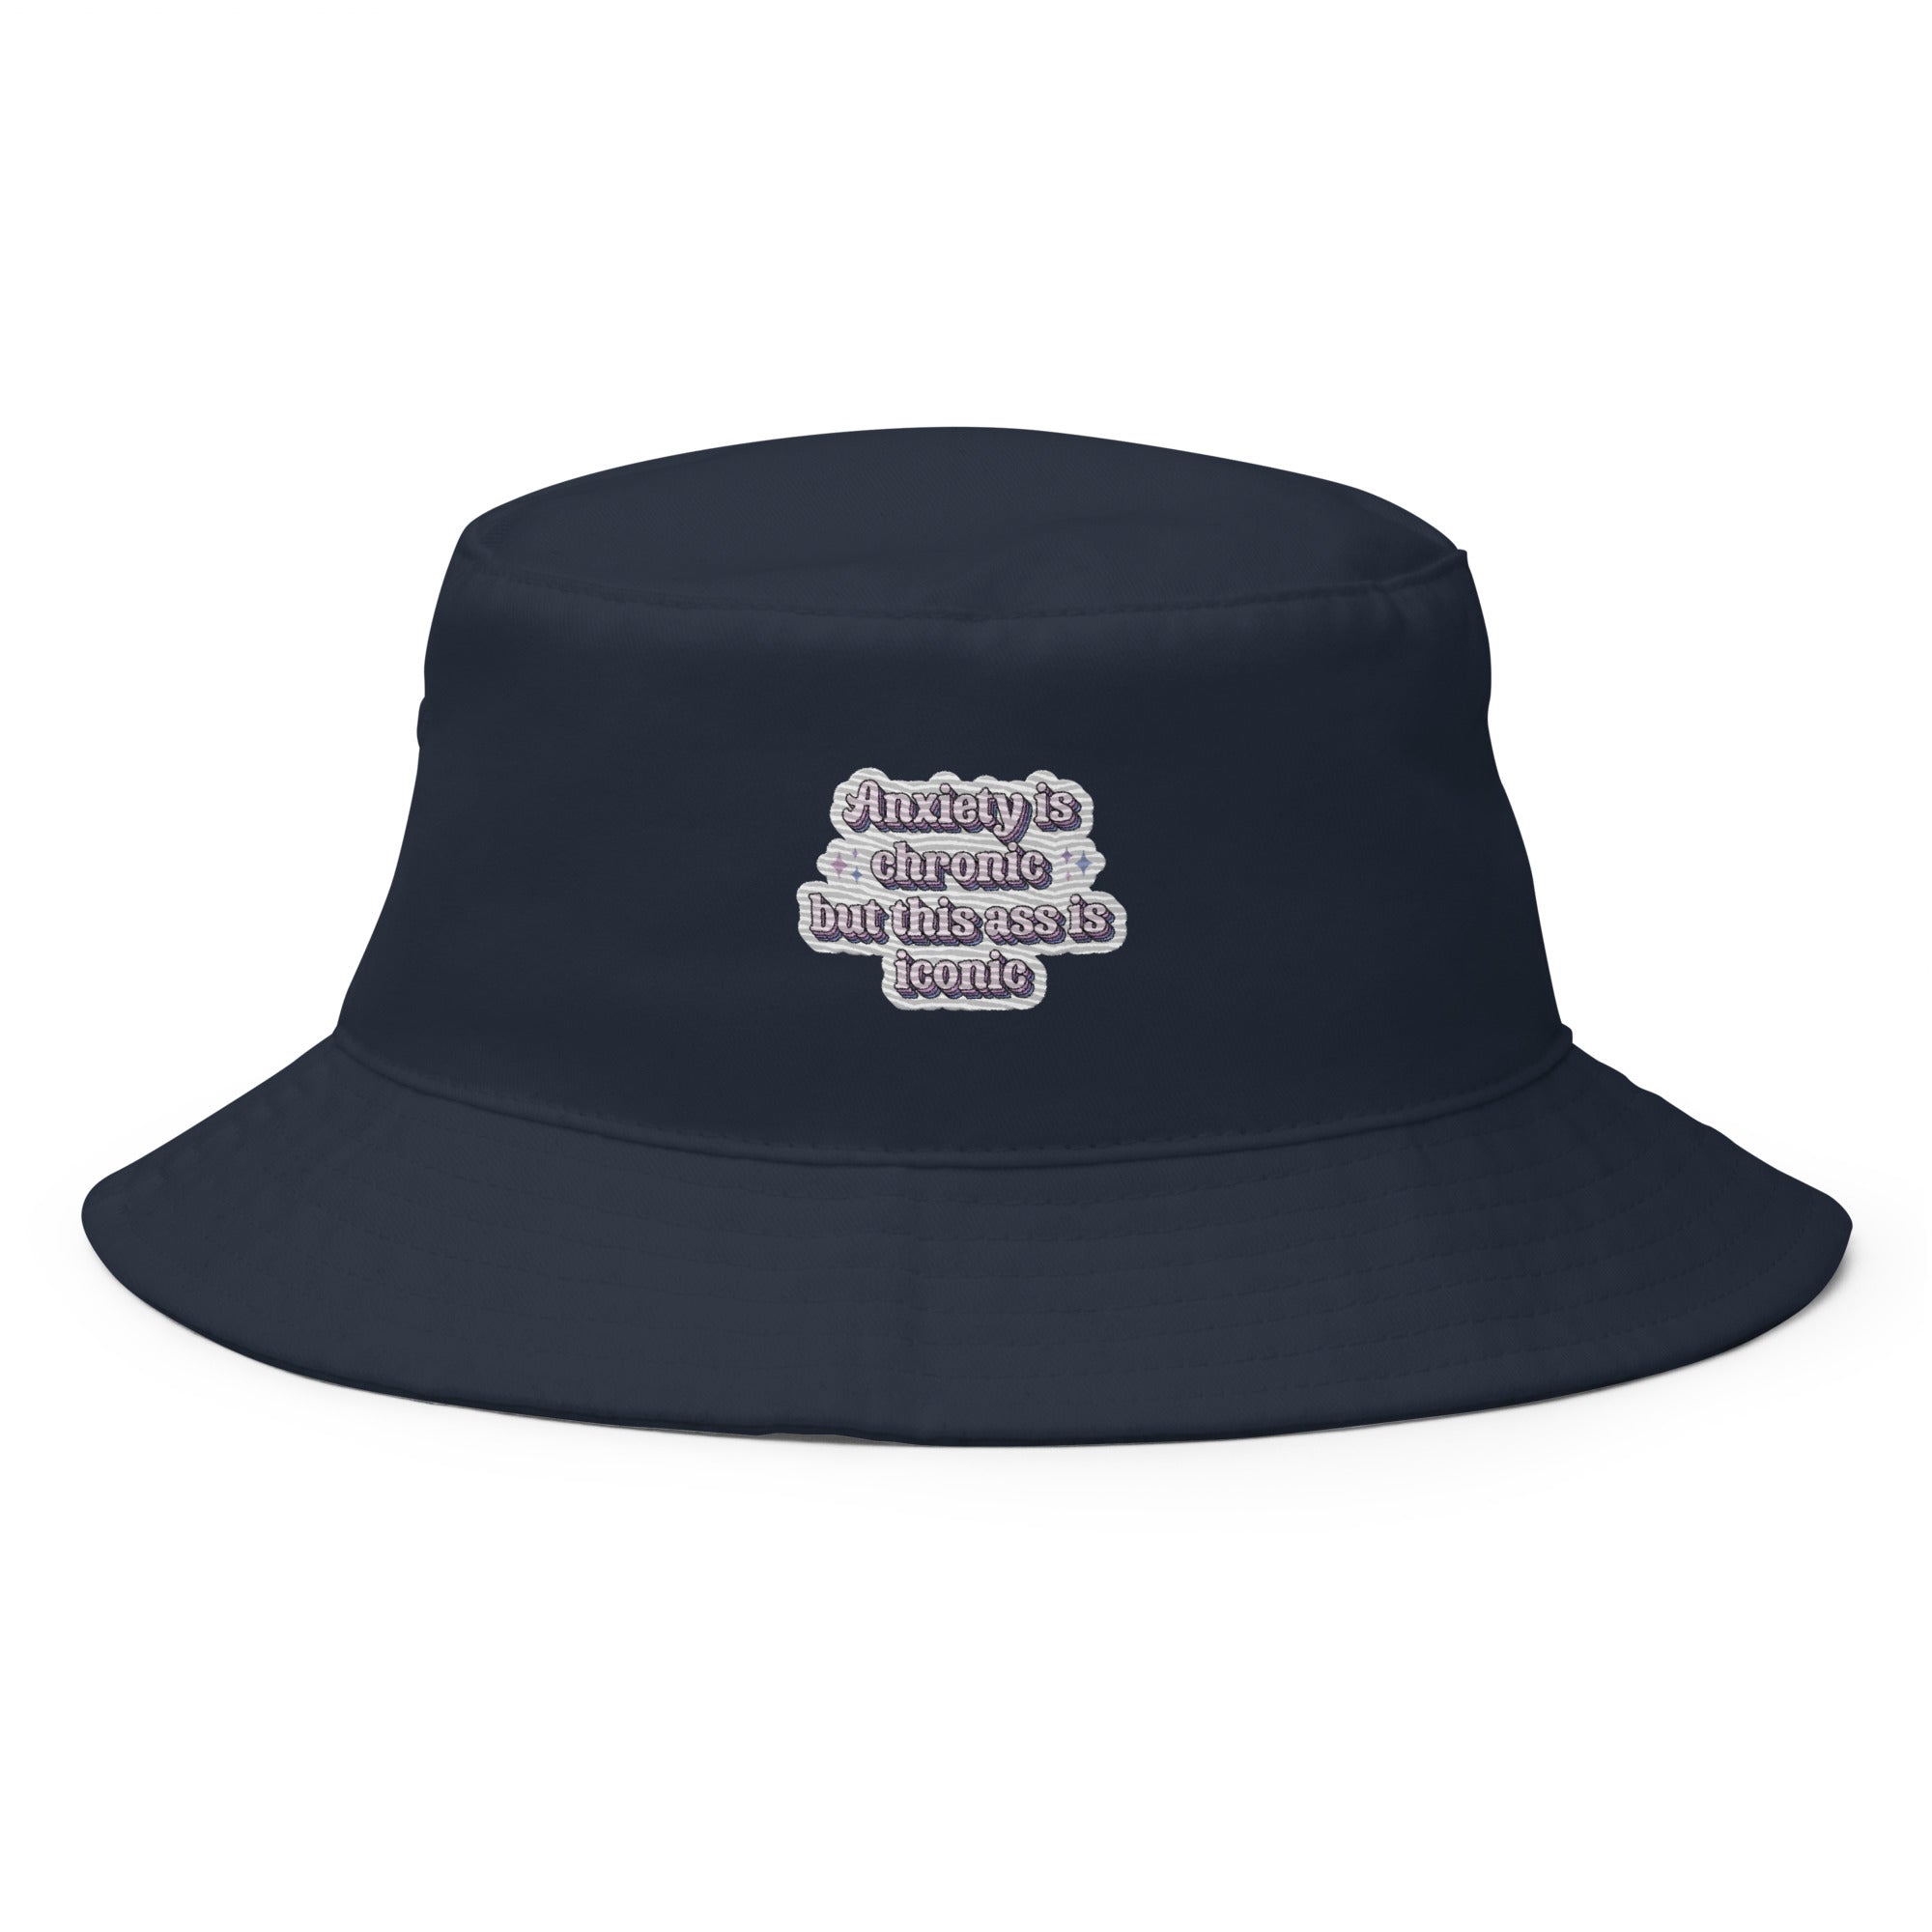 Anxiety is Chronic but this ass is iconic Premium Embriodered Bucket Hat